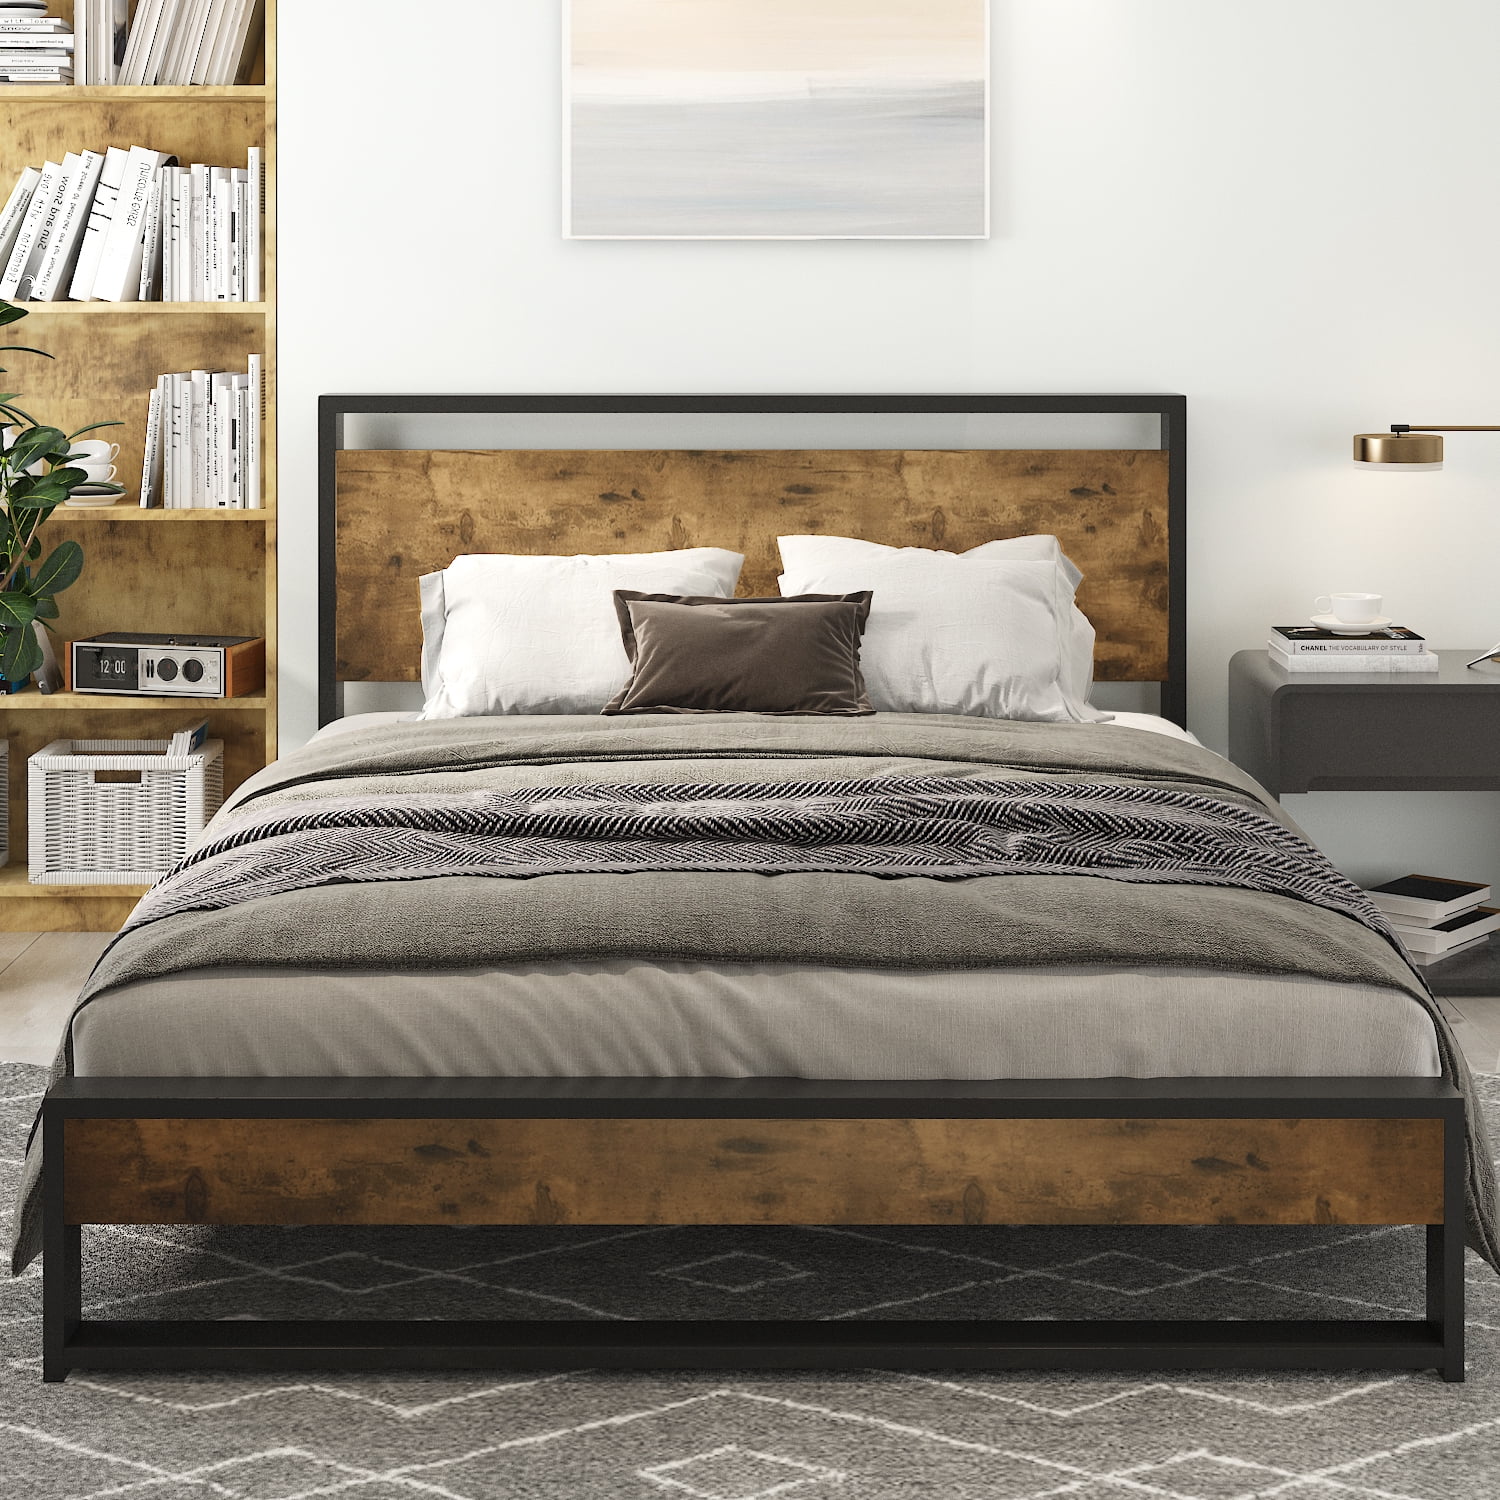 Amolife Queen Bed Frame With Wooden, Dark Brown Wooden Bed Frame